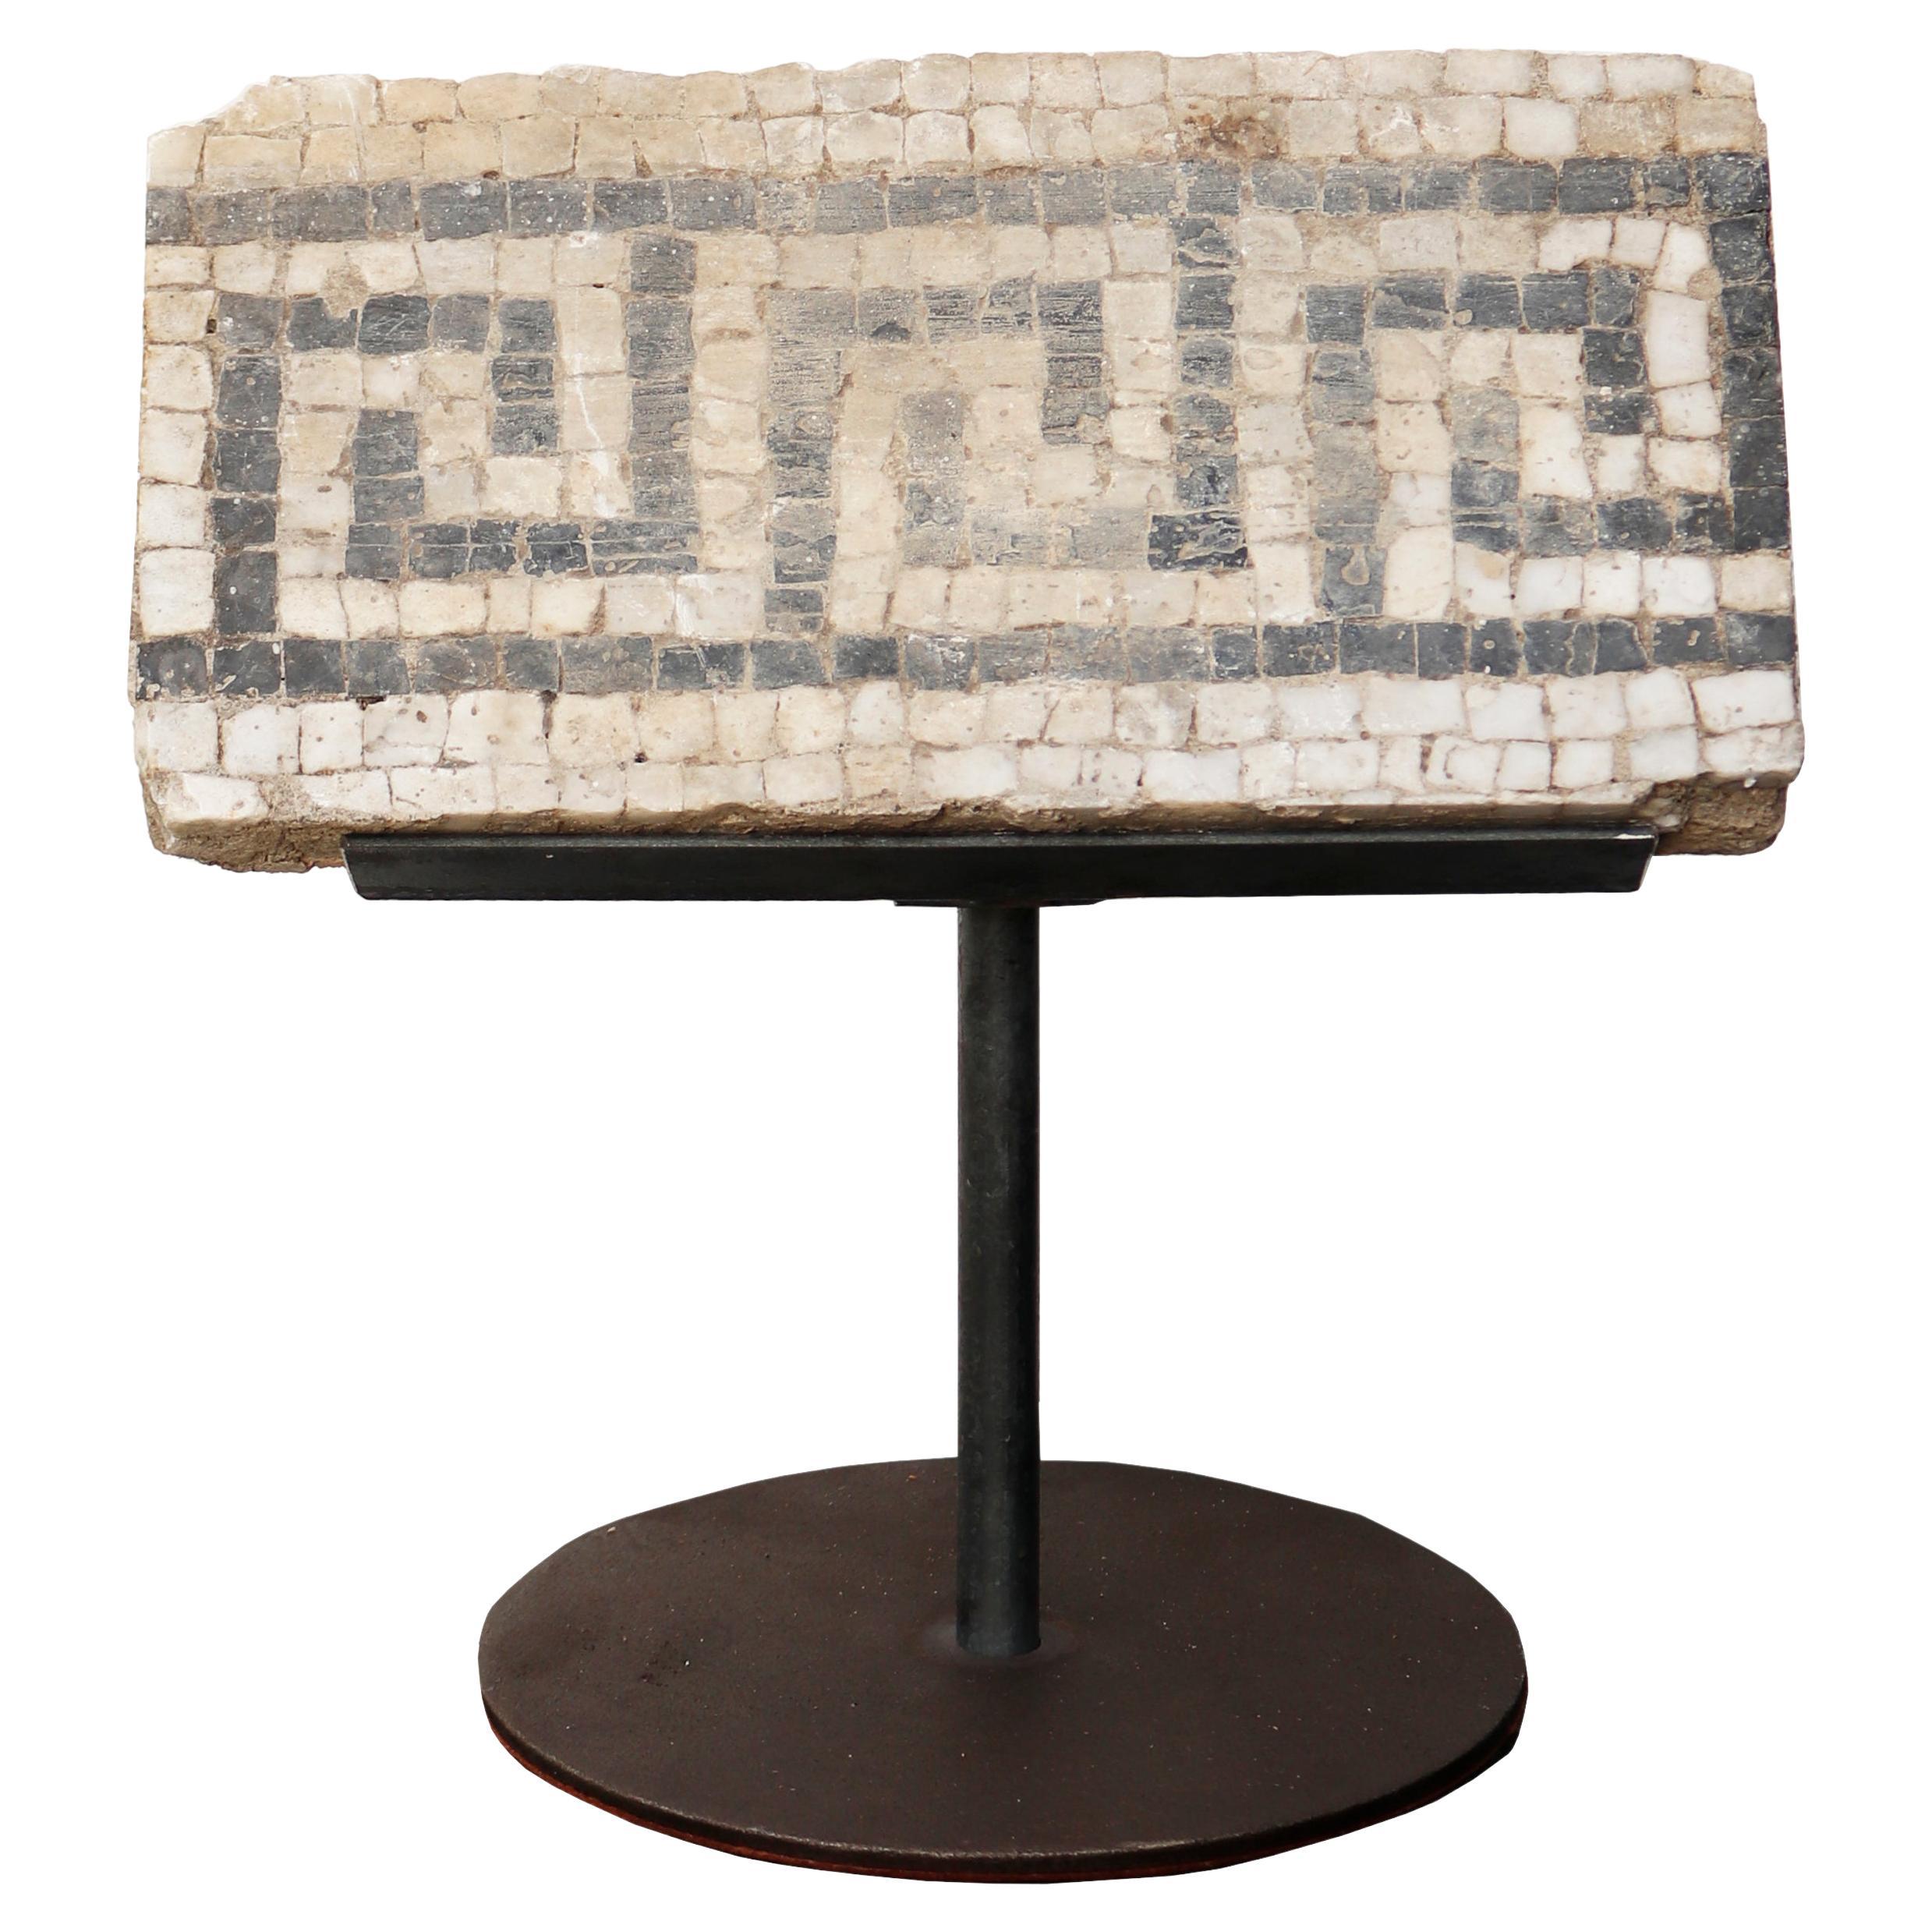 Reclaimed Roman Style Mosaic Floor Fragment on Stand For Sale